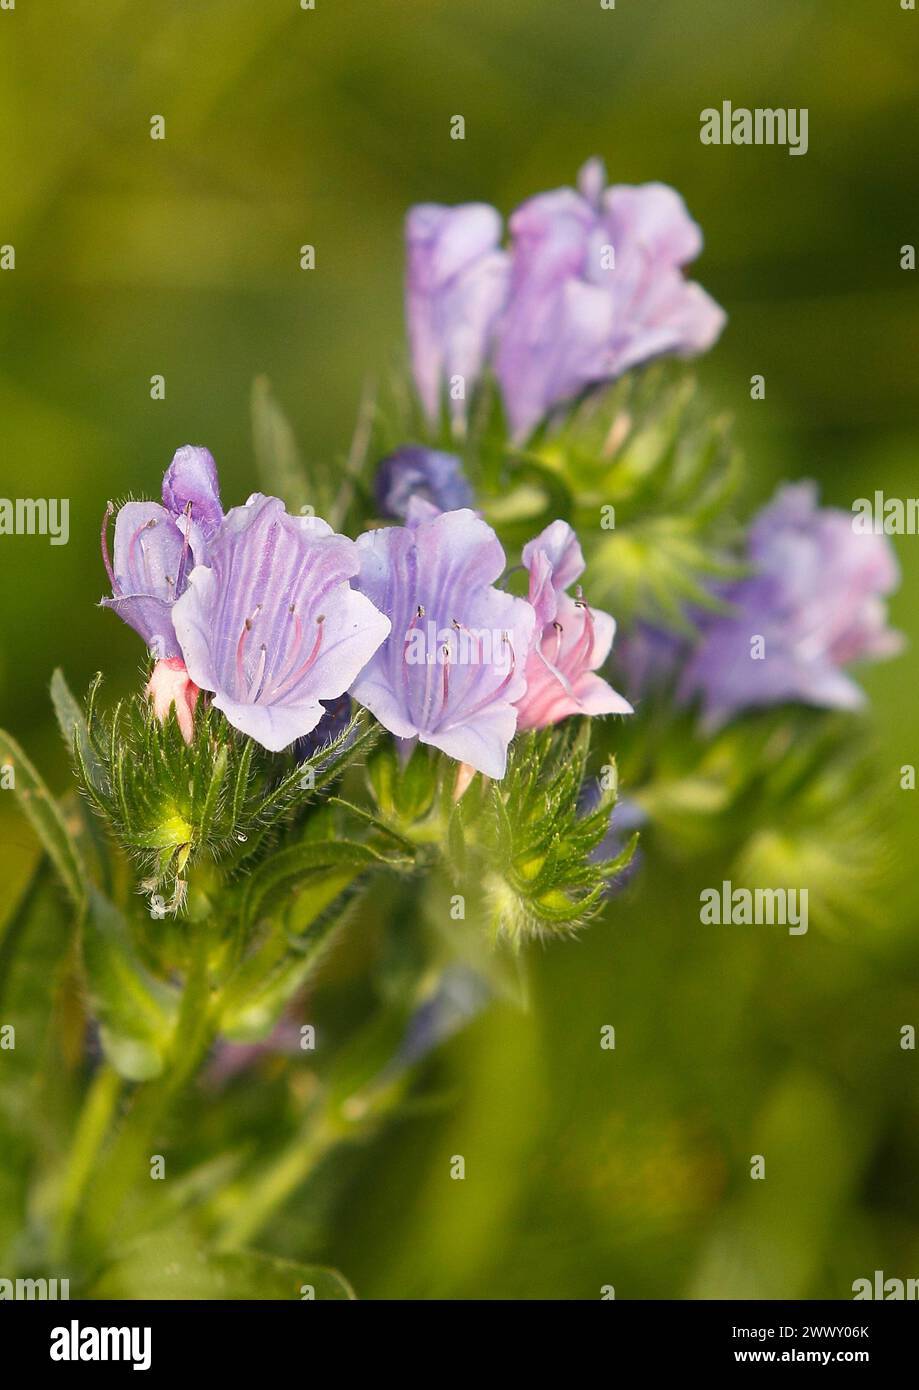 Common viper's bugloss (Echium vulgare), close-up of flowers from the front, North Rhine-Westphalia, Germany Stock Photo